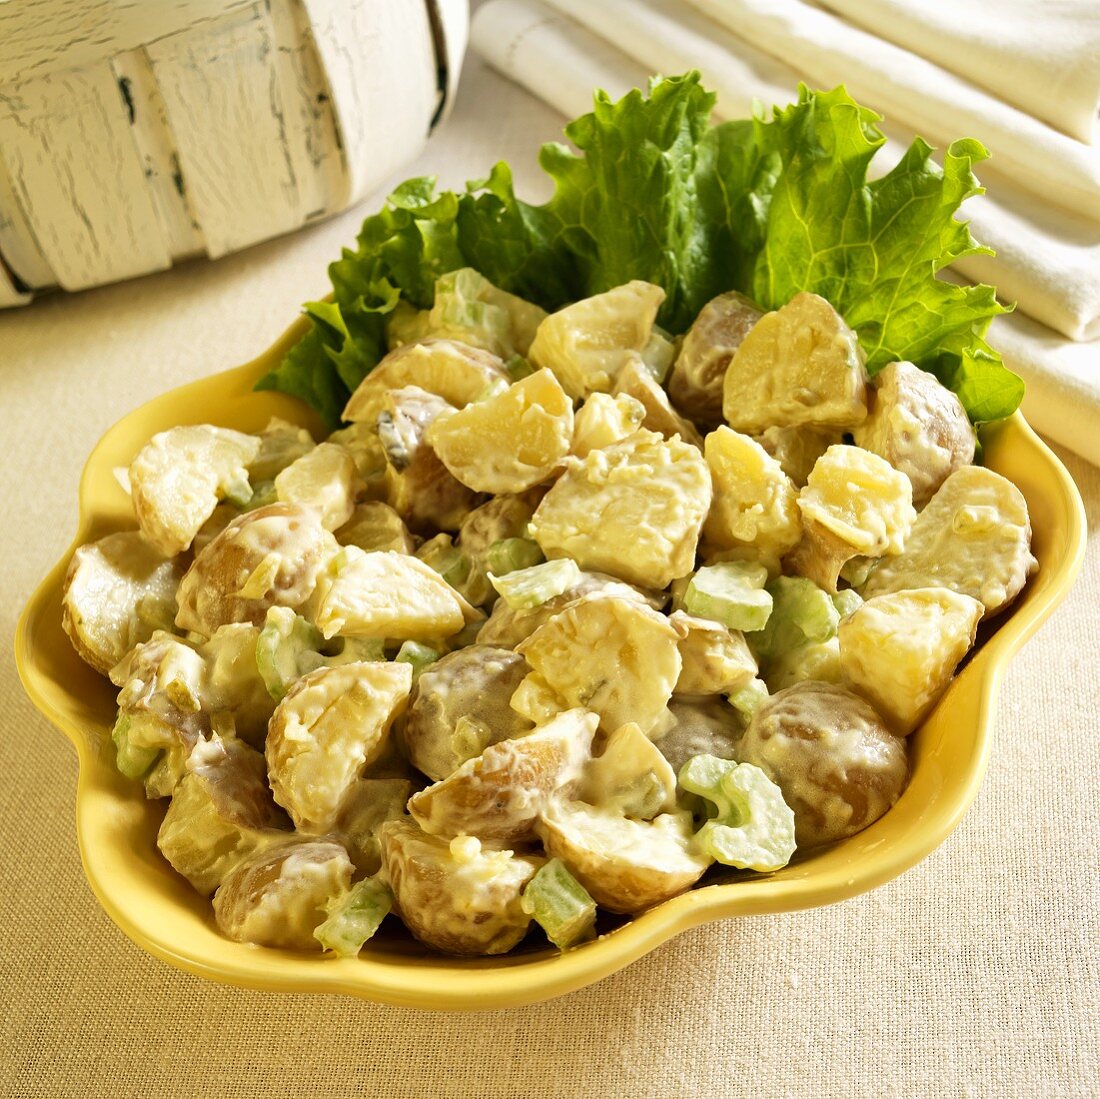 Potato Salad in a Serving Bowl with Lettuce Garnish